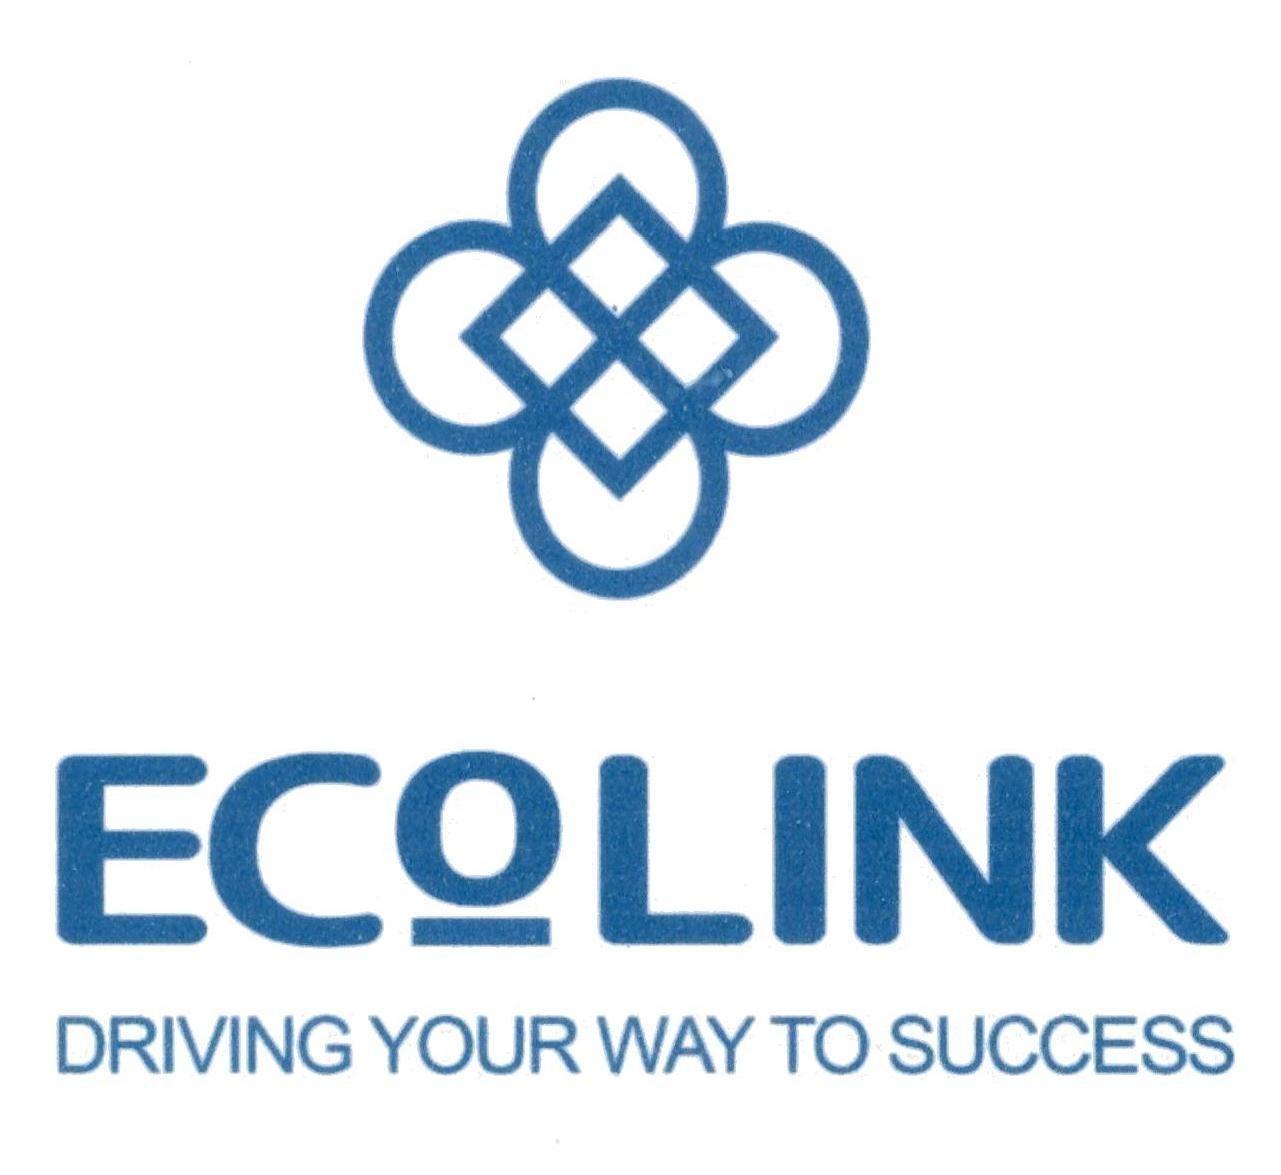 ECOLINK DRIVING YOUR WAY TO SUCCESS